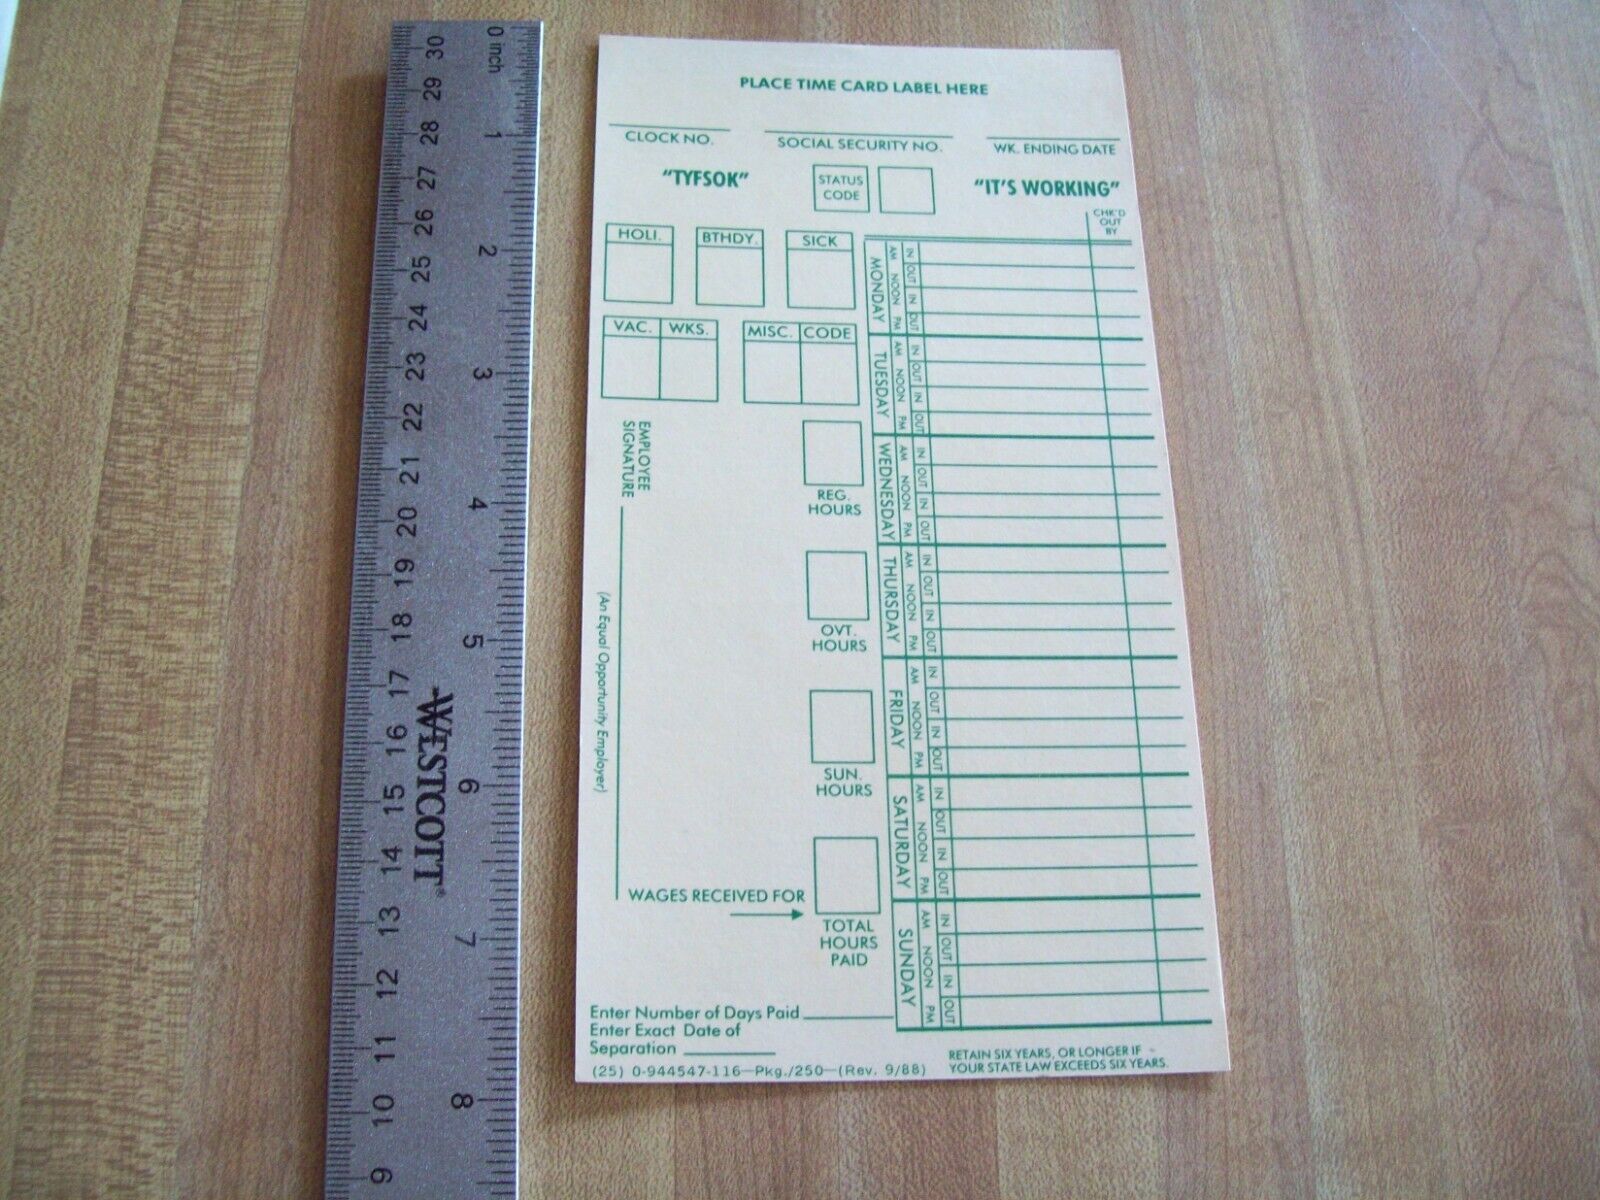 K-MART UN-USED VINTAGE TIMECARD FROM THE LATE 1980\'s RARE KMART ITEM